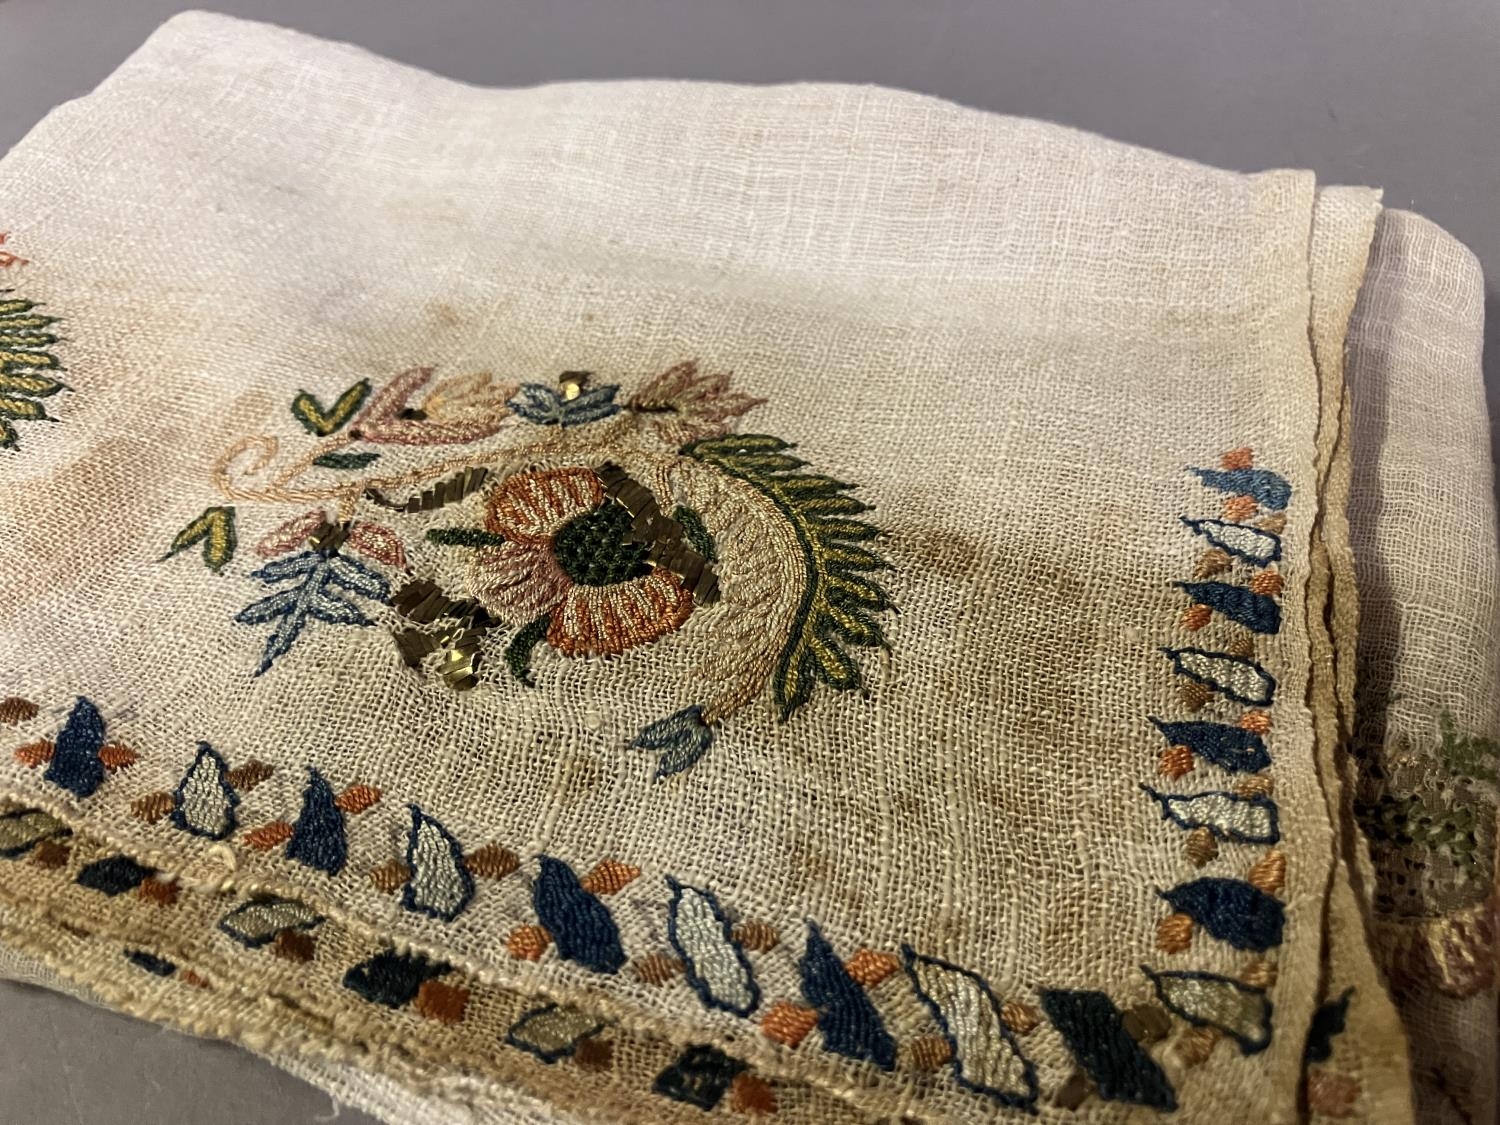 Ottoman textiles, a selection of towels and a shawl: a medium weight towel with silk embroidery to - Image 3 of 4